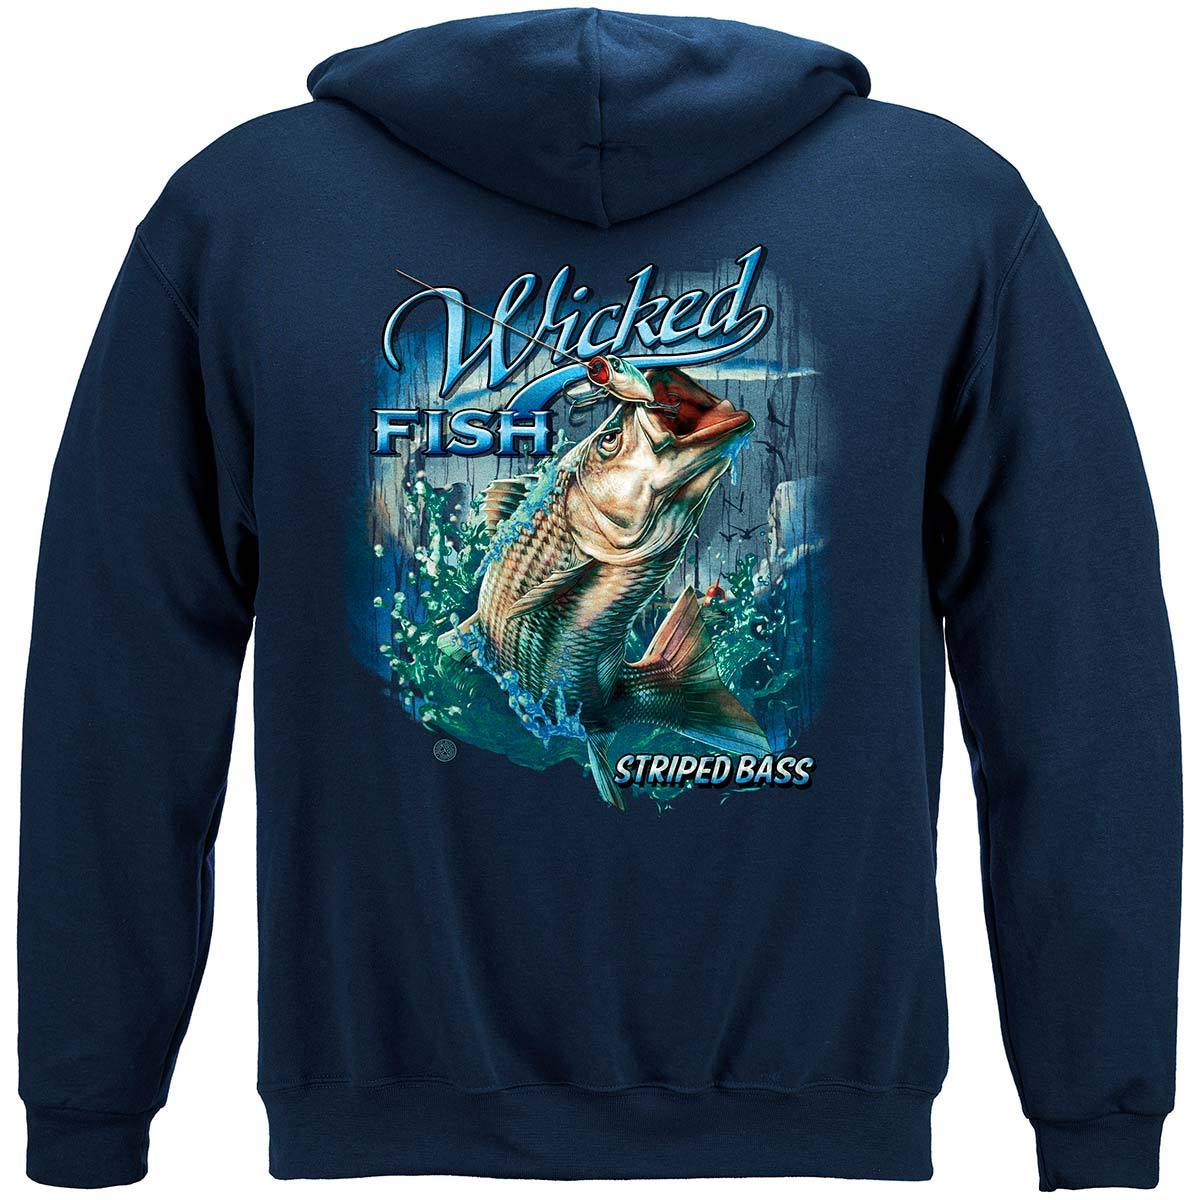 Wicked Fish Striped Bass with Popper Air Born Premium T-Shirt, Hoodie / XX-Large